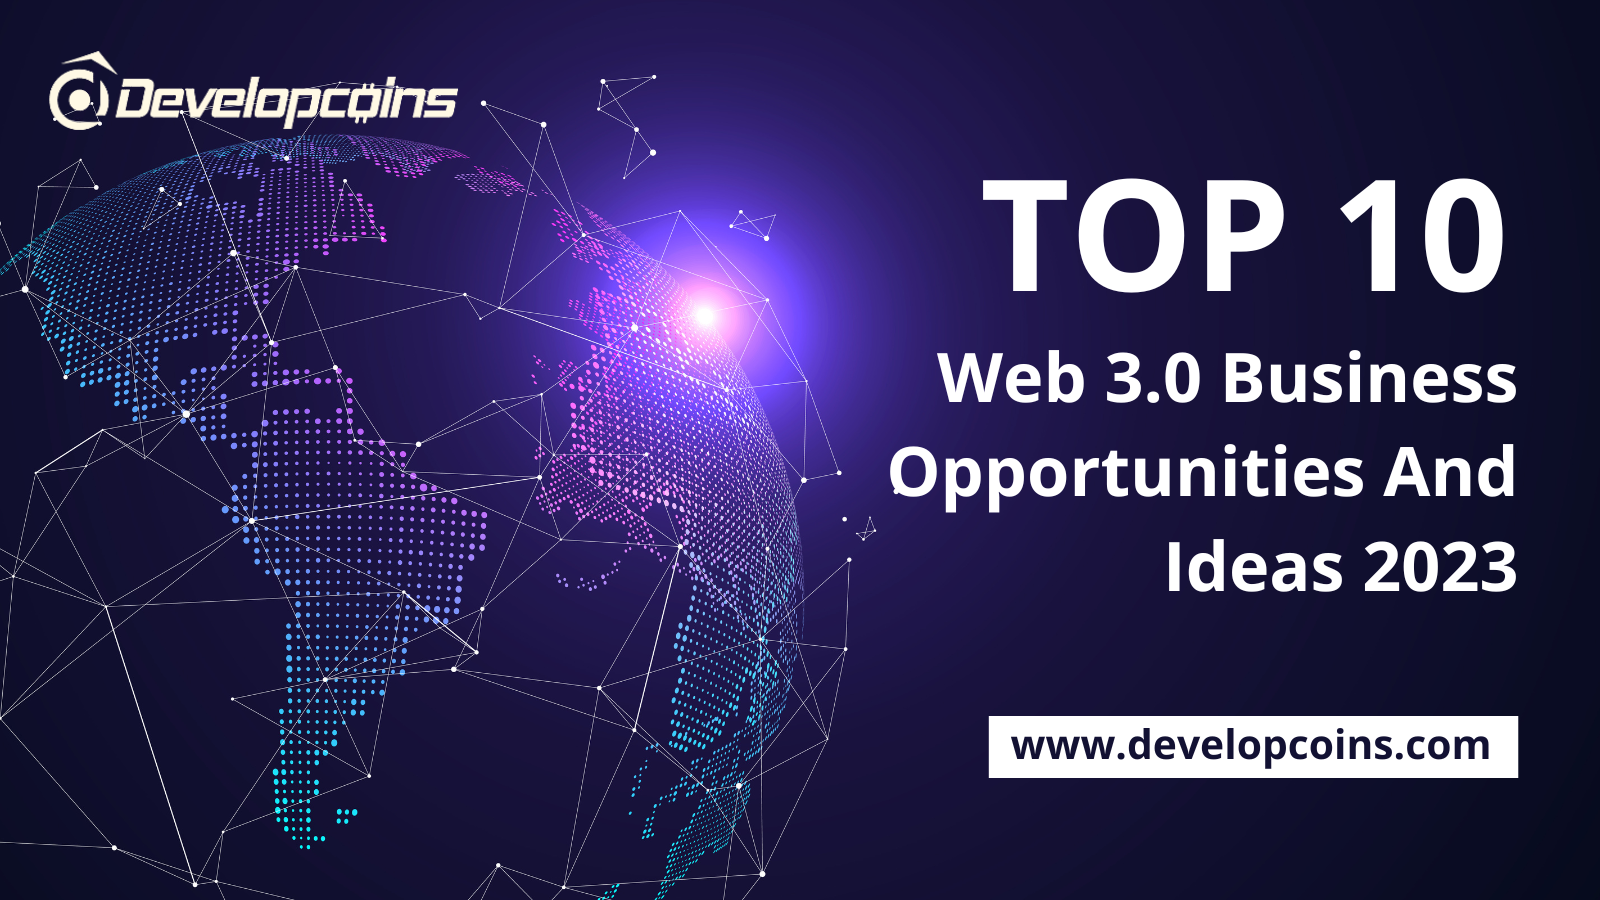 Top 10 Web 3.0 Business Opportunities And Ideas 2023